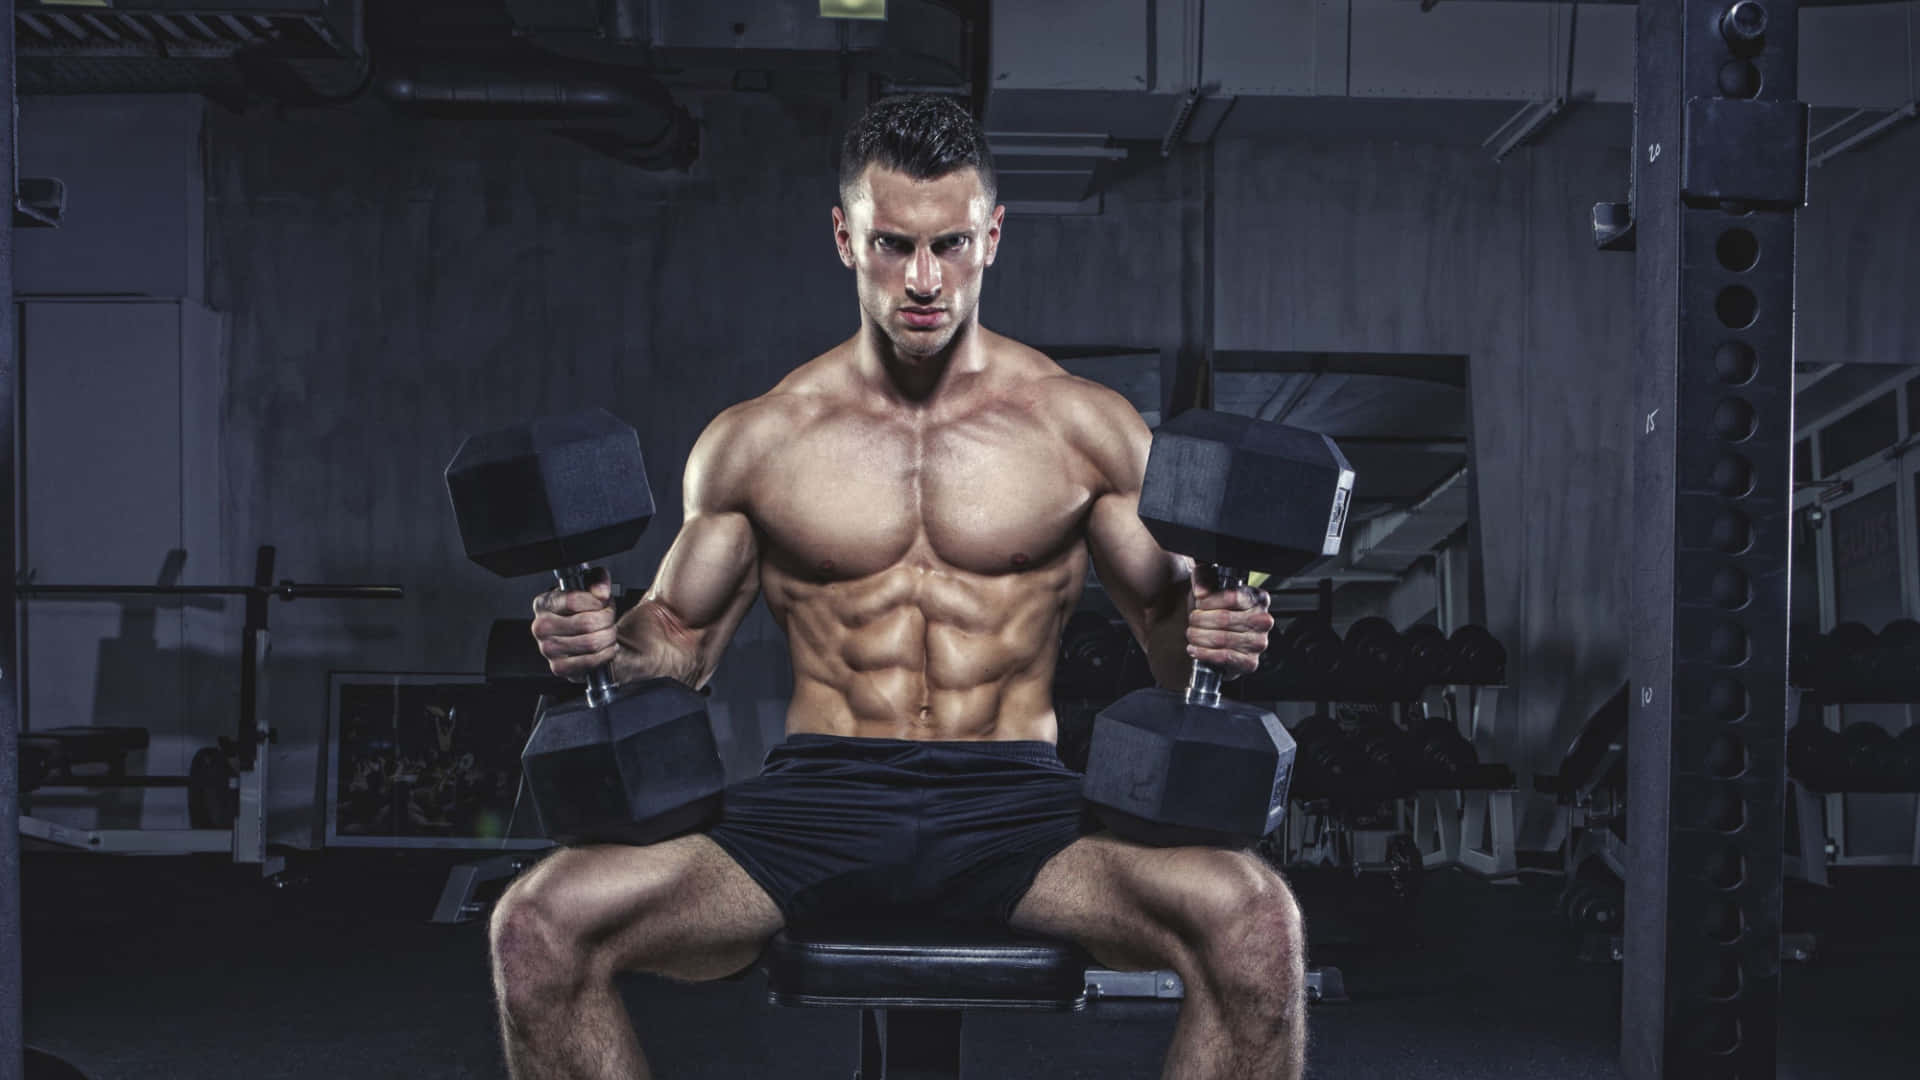 "Achieving your bodybuilding goals one lift at a time."